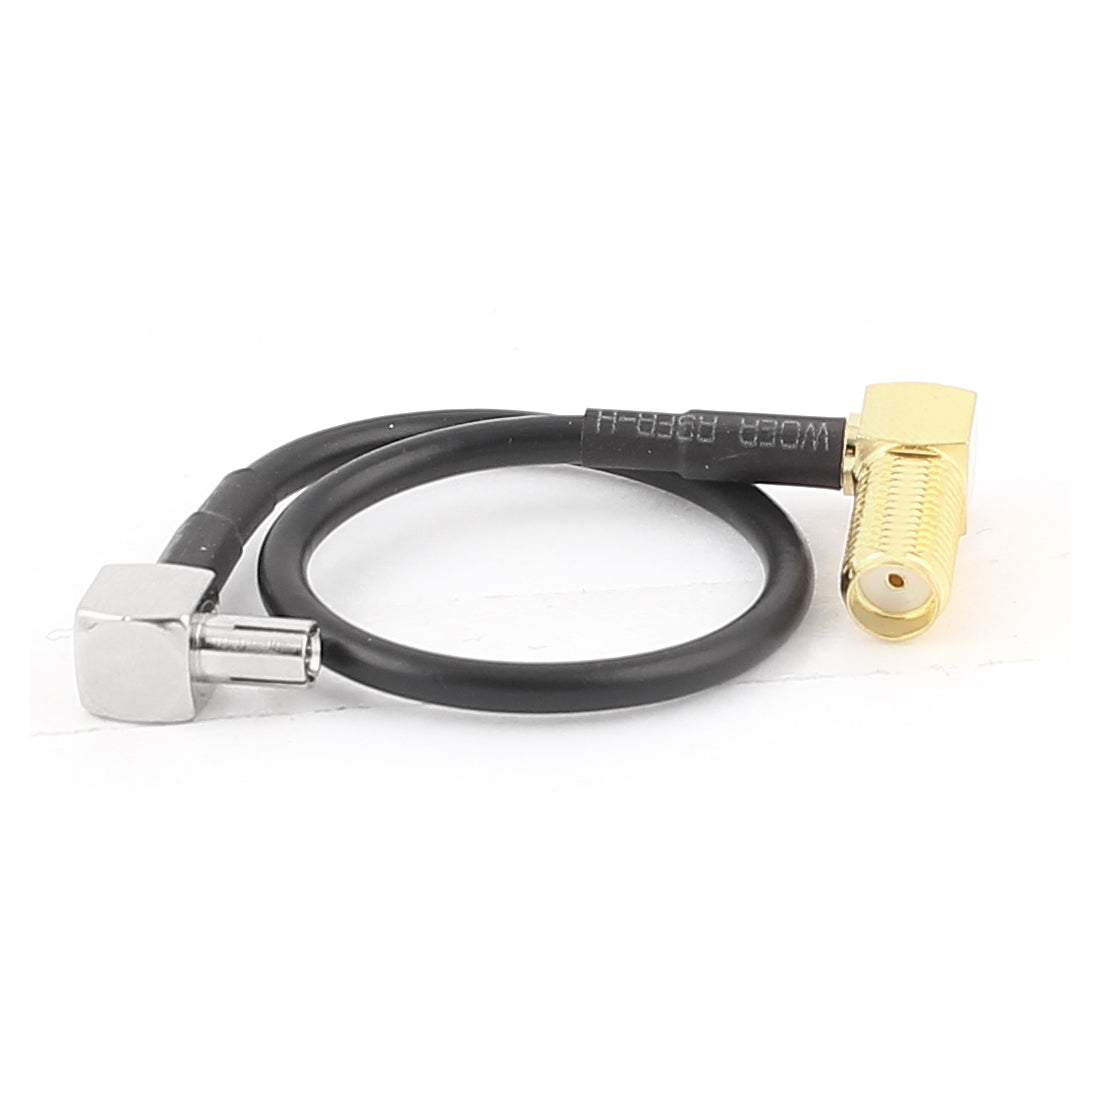 uxcell Uxcell TS9 Female to SMA-KW Female RG174 Coaxial Cable Pigtail 15cm